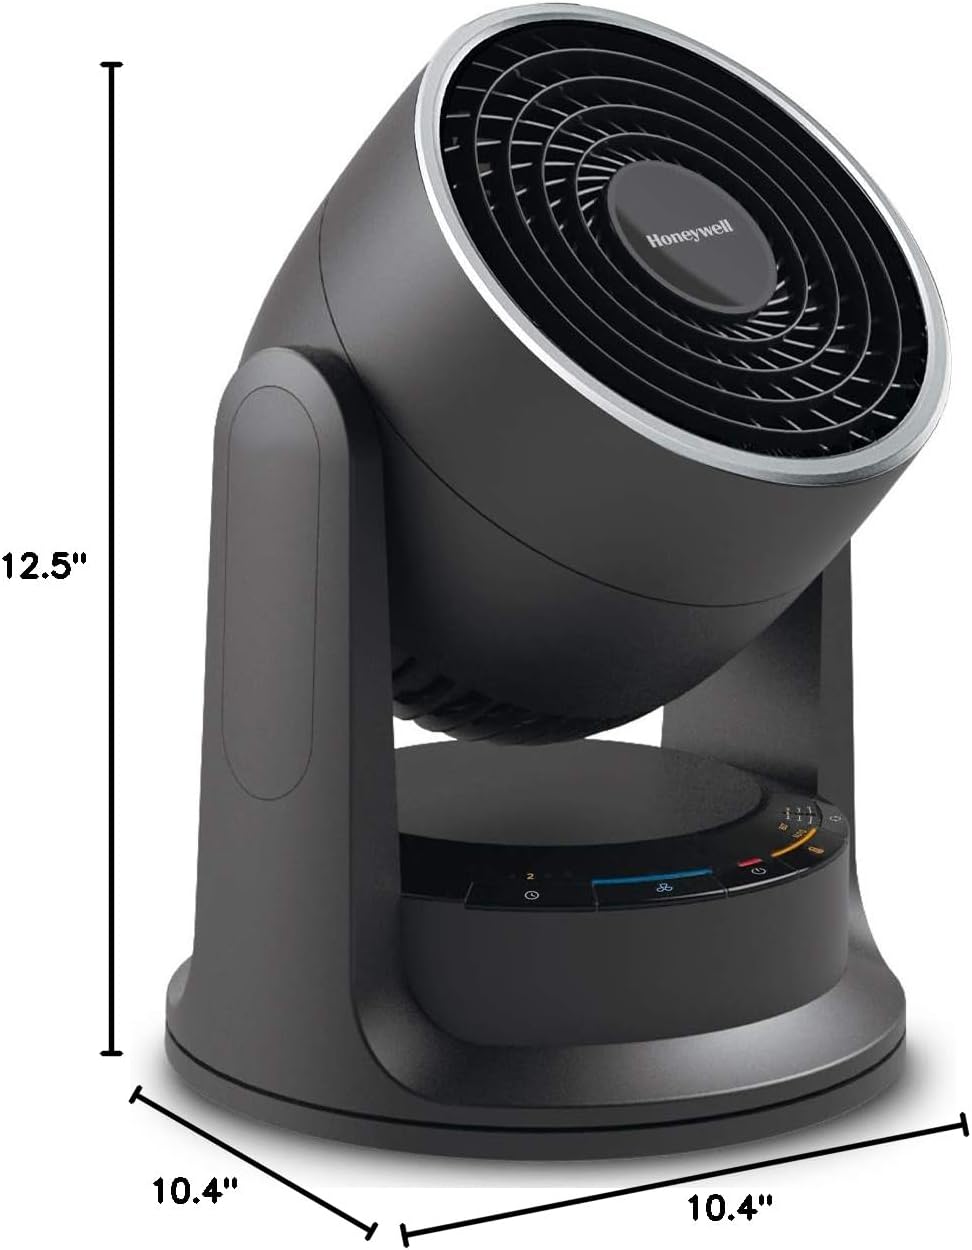 https://bigbigmart.com/wp-content/uploads/2023/11/Honeywell-Turbo-Force-Power-Heater-Fan-%E2%80%93-Space-Heater-with-Wide-Area-Heating-Pivoting-Head-and-Triple-Oscillation-%E2%80%93-Fan-and-Heater-Combo-with-Powerful-Heat-and-Circulation-Black-Medium11.jpg